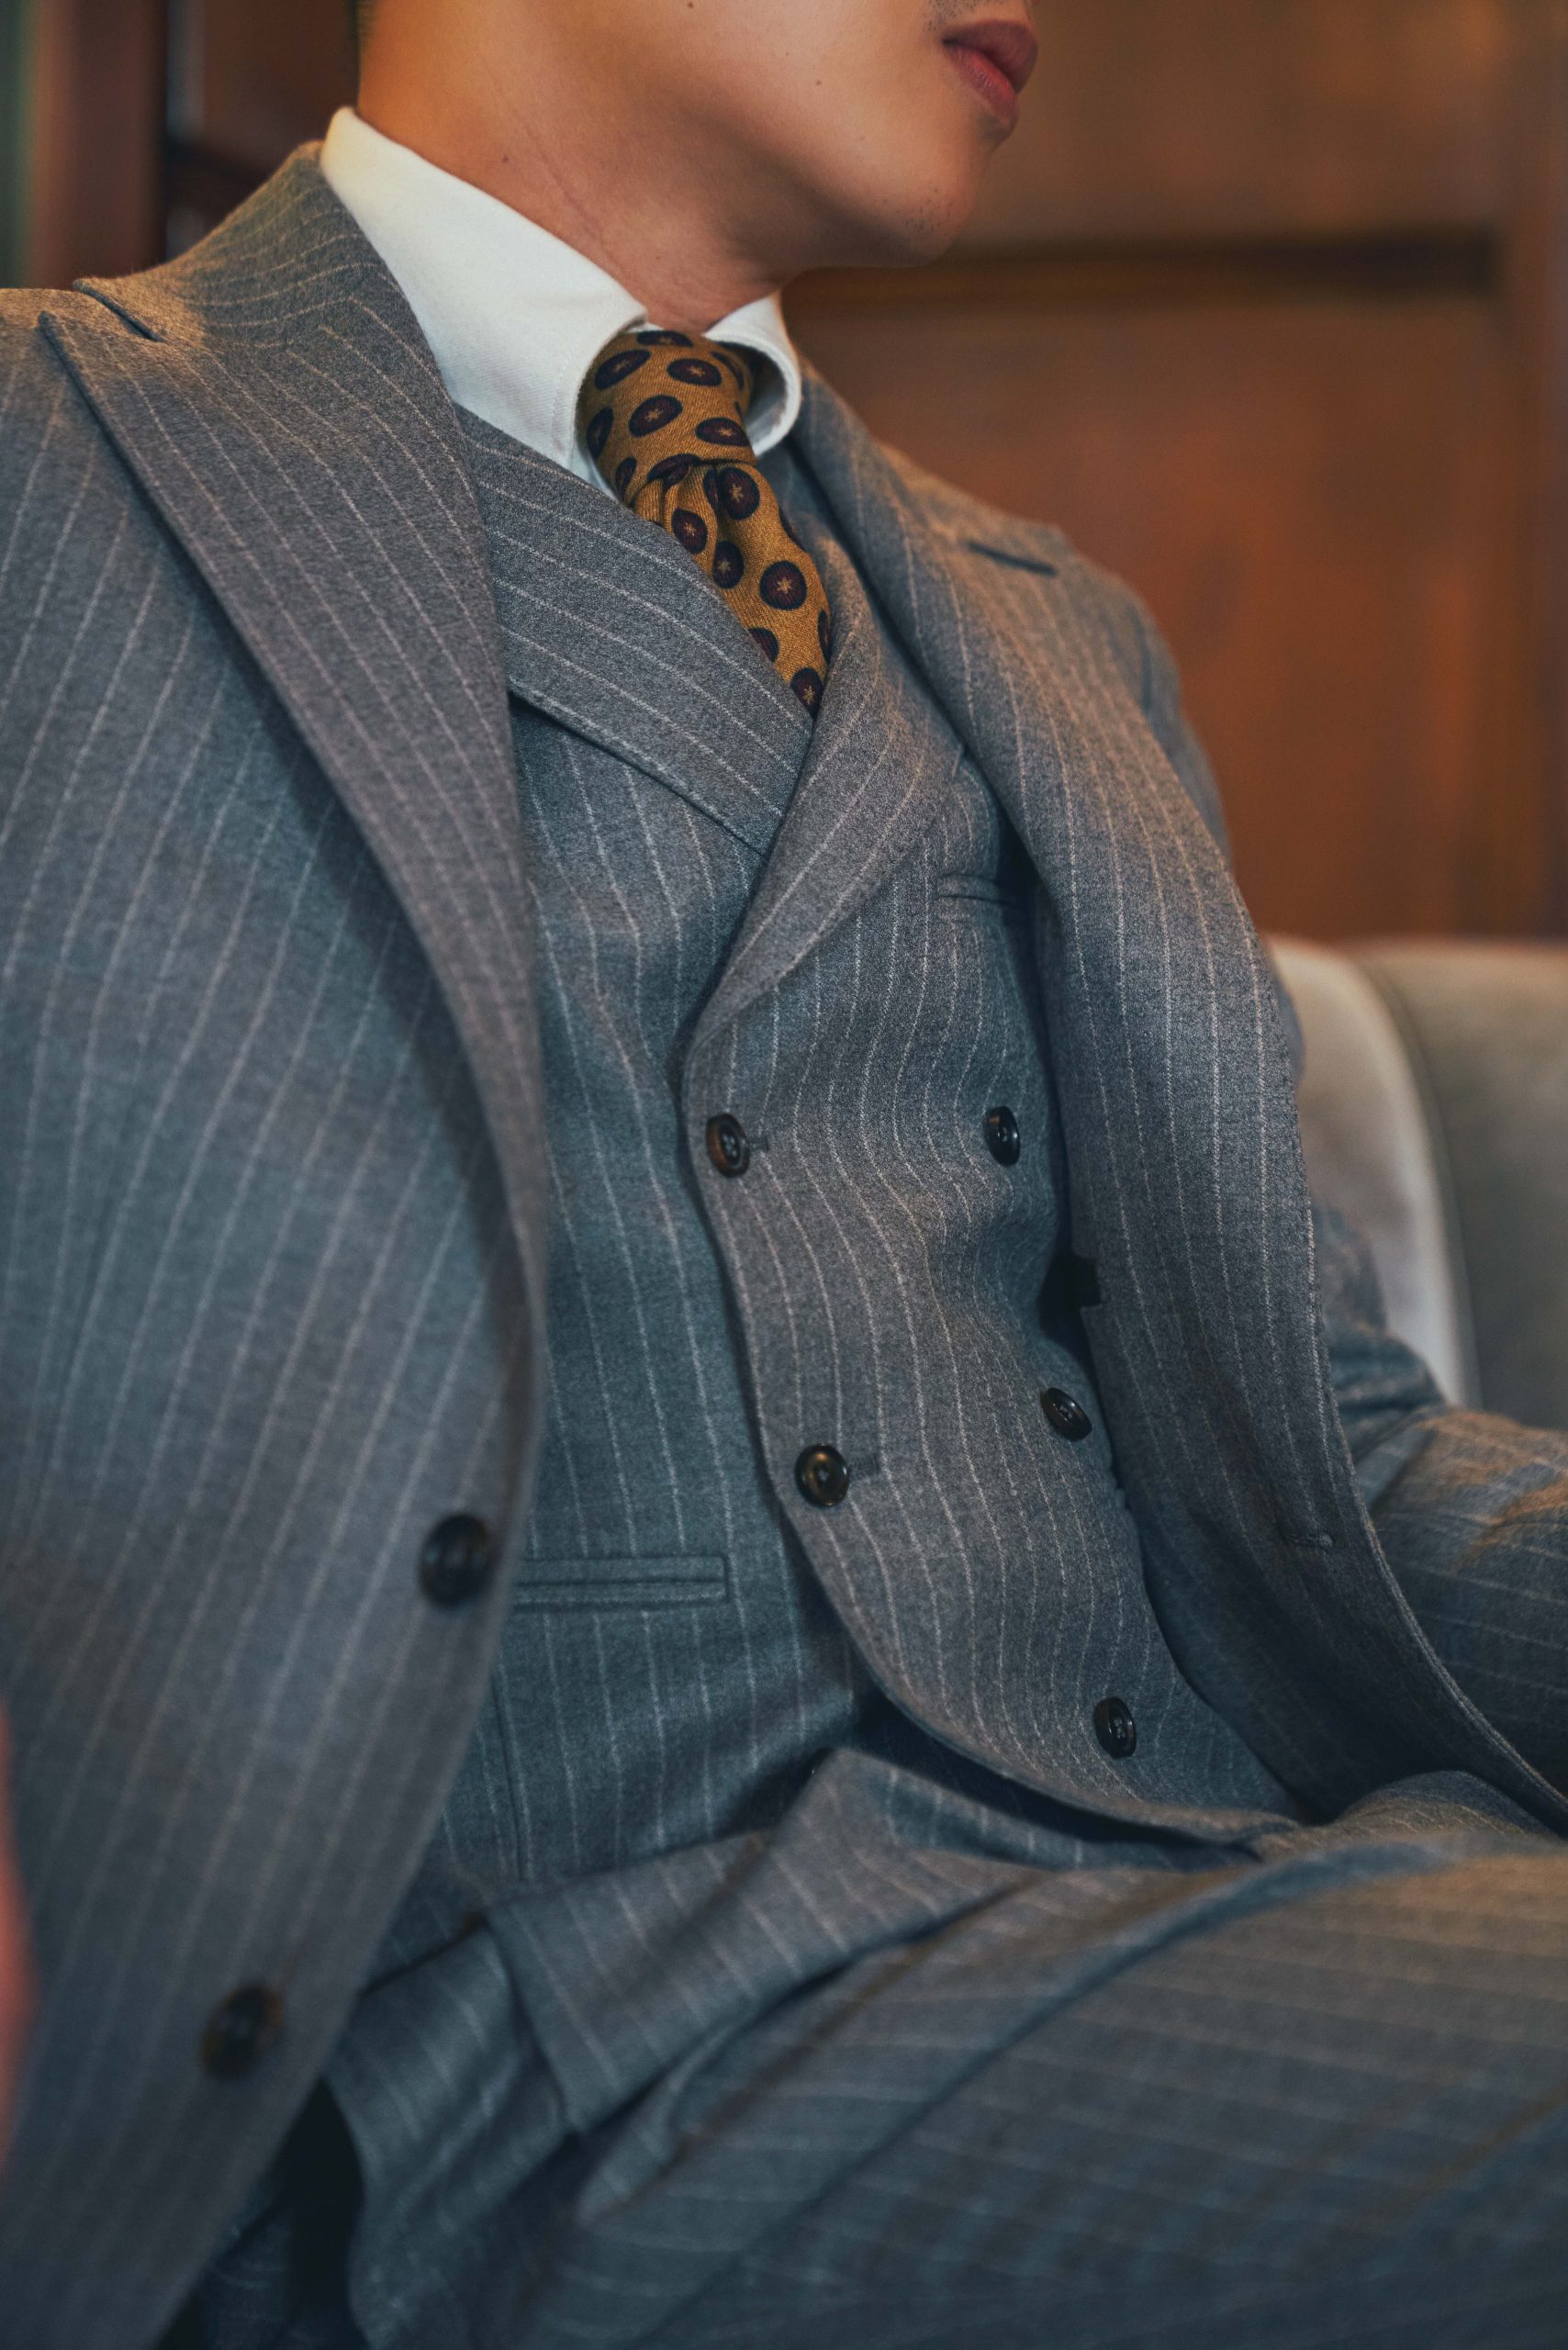 pinstripe grey flannel suit, custom made by mond